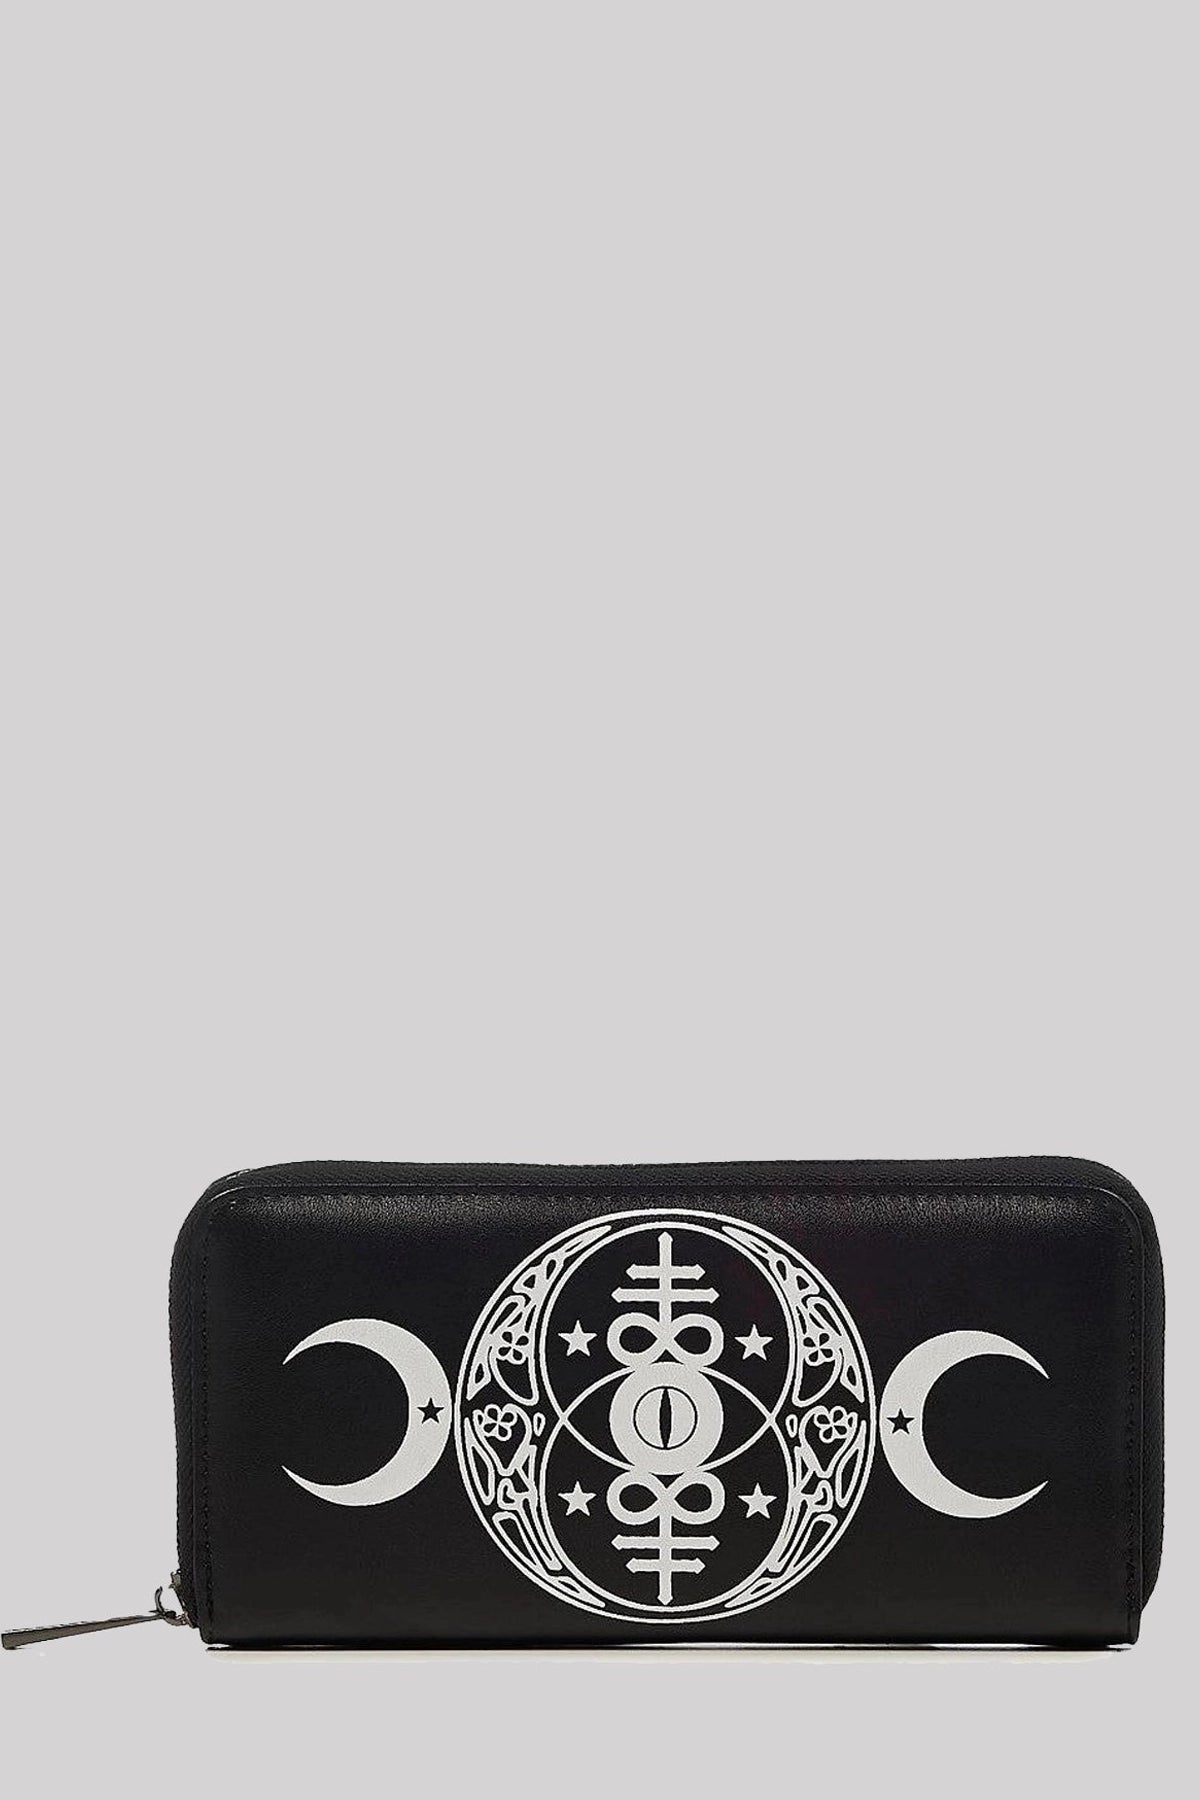 Banned Hollow Wallet Moon Phase Witchcraft Occult